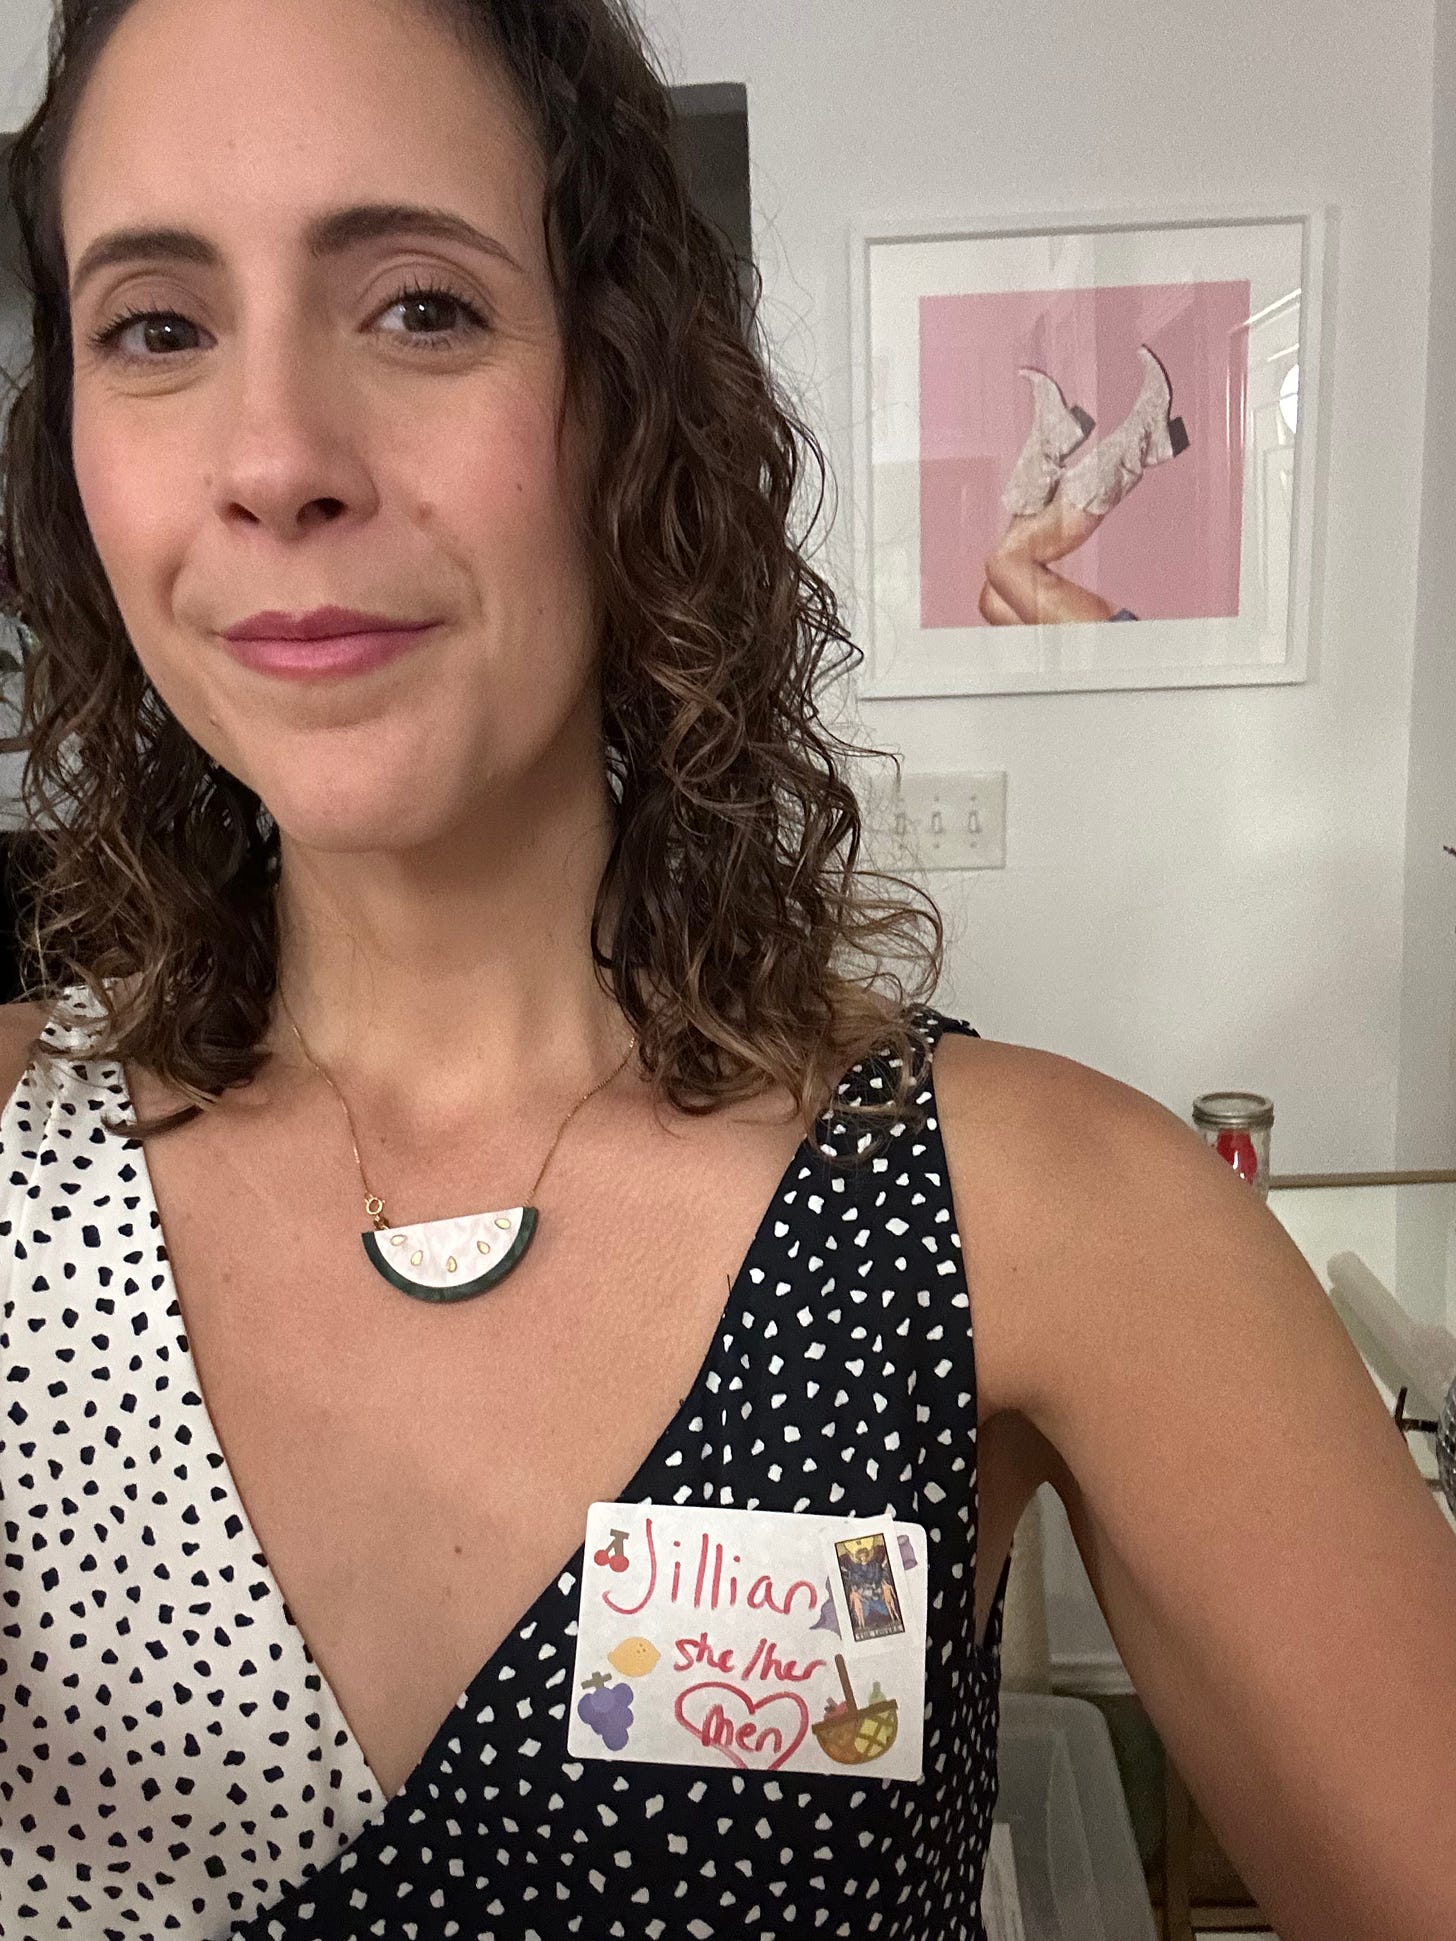 A brunette woman with curly hair smiles and takes a selfie. She wears a watermelon necklace, polka dot dress, and a nametag with her name, pronouns, and interest in men.